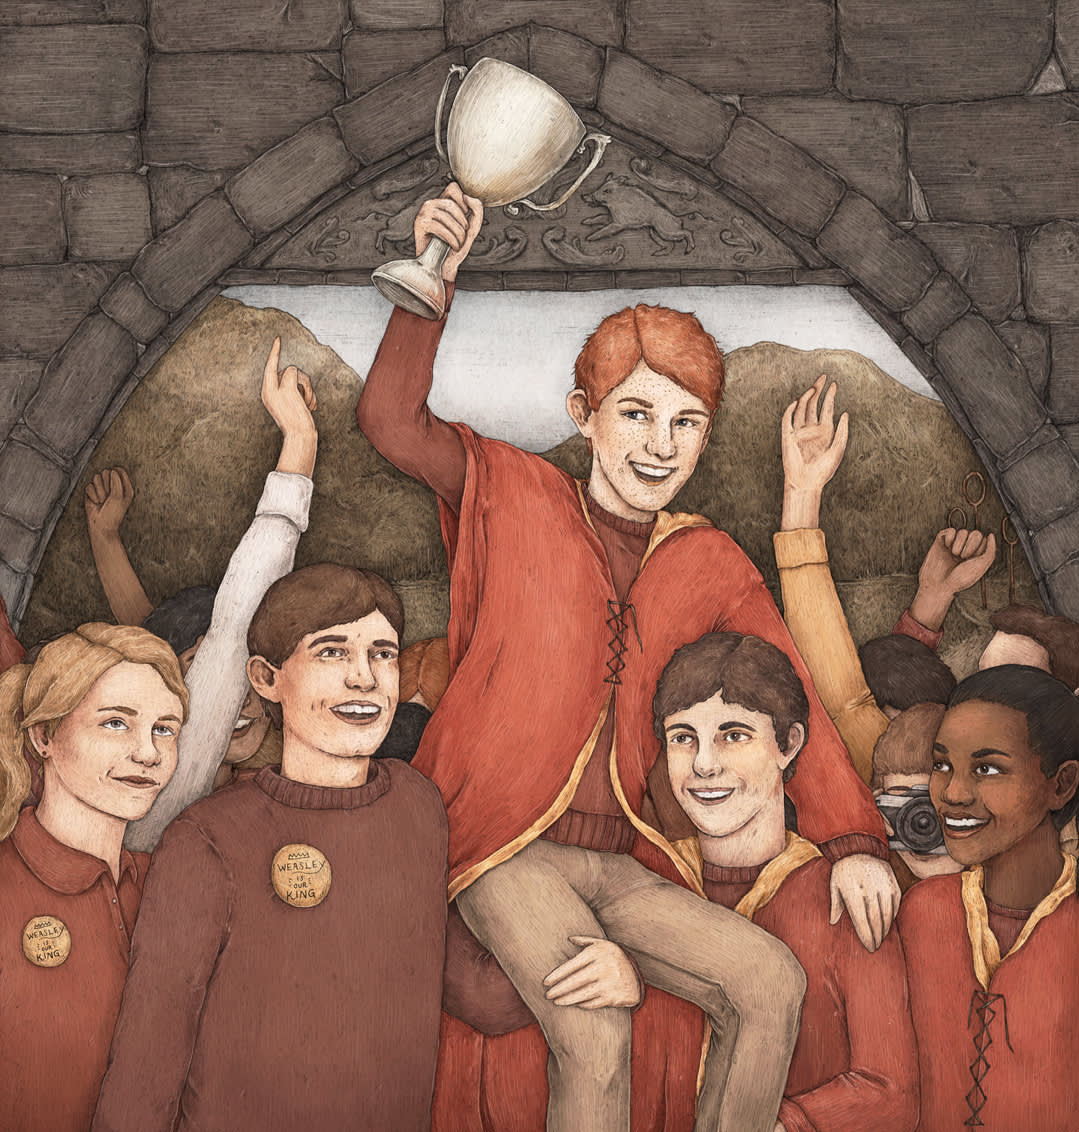 Illustration of Ron Weasley by Jessica Roux